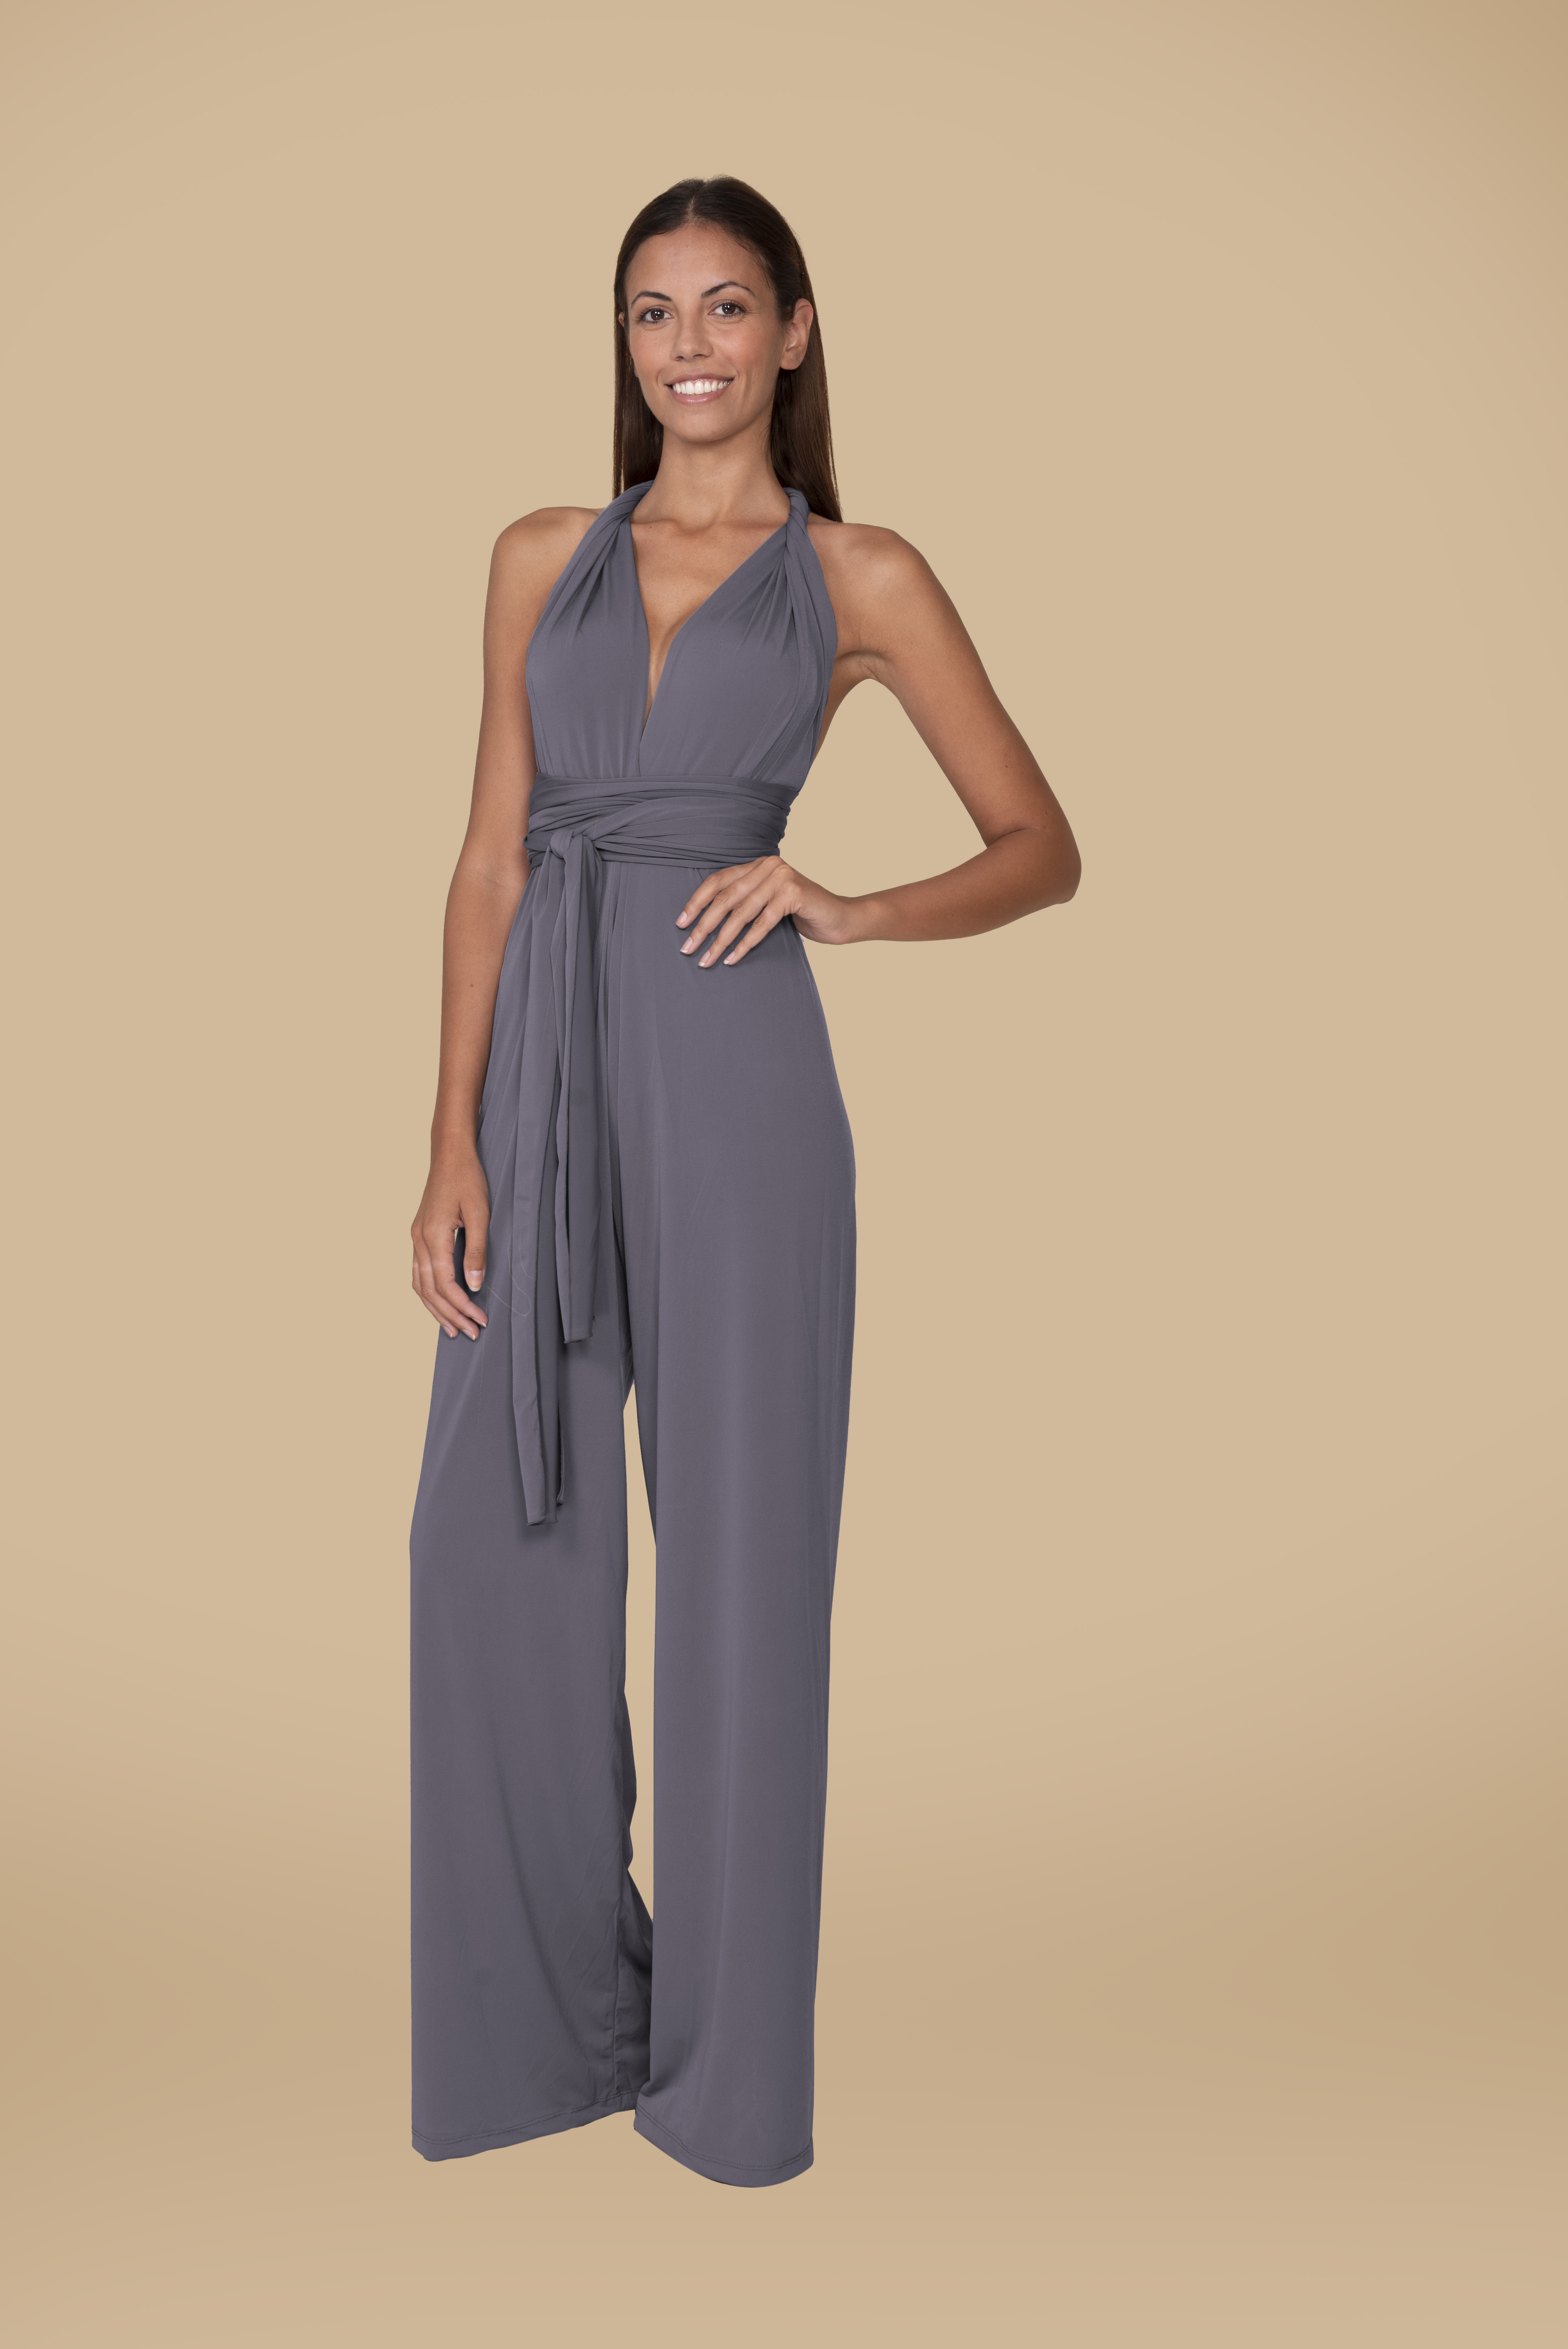 JUMPSUIT IN GREY by Infinit Barcelona